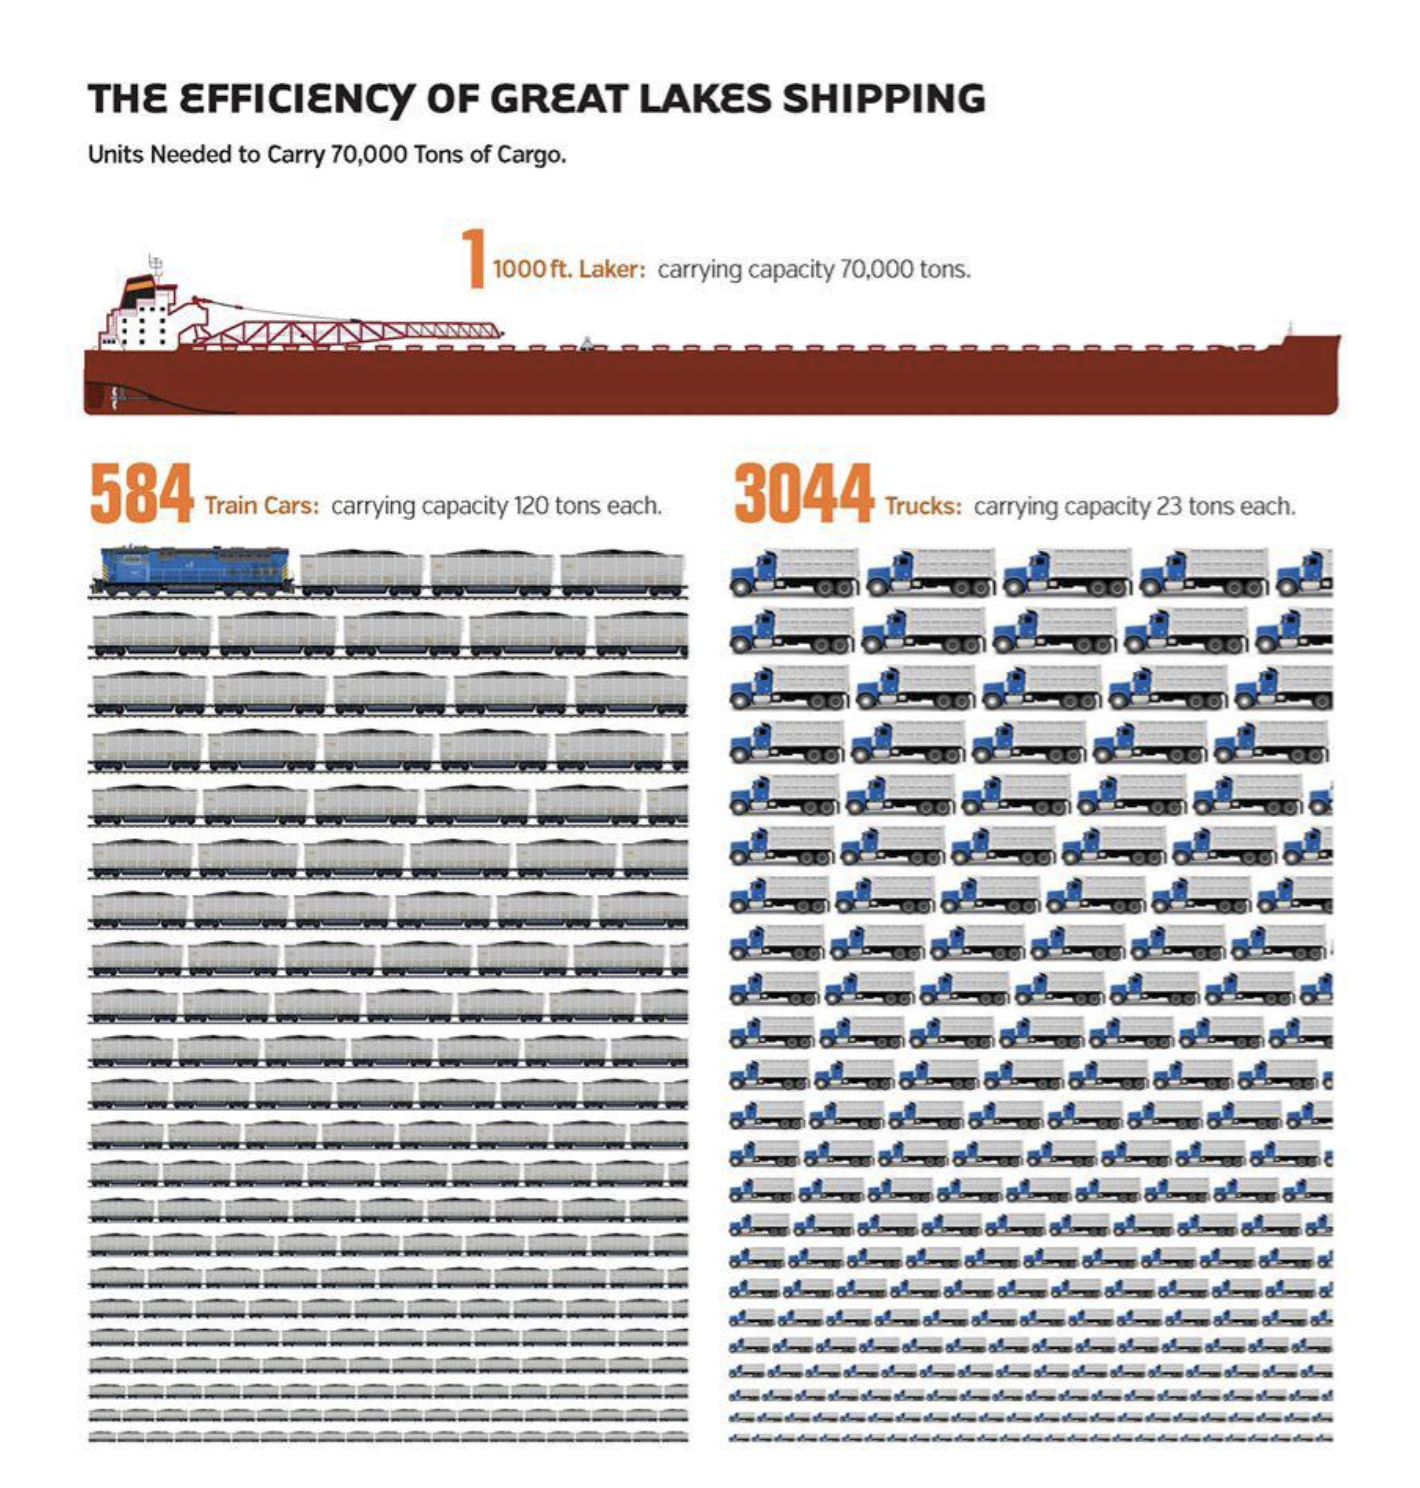 Cargo - The Efficiency Of Great Lakes Shipping Units Needed to Carry 70,000 Tons of Cargo. 1000 ft. Laker carrying capacity 70.000 tons. 584 Train Cars carrying capacity 120 tons each 3044 Trucks carrying capacity 23 tons each almal alim al